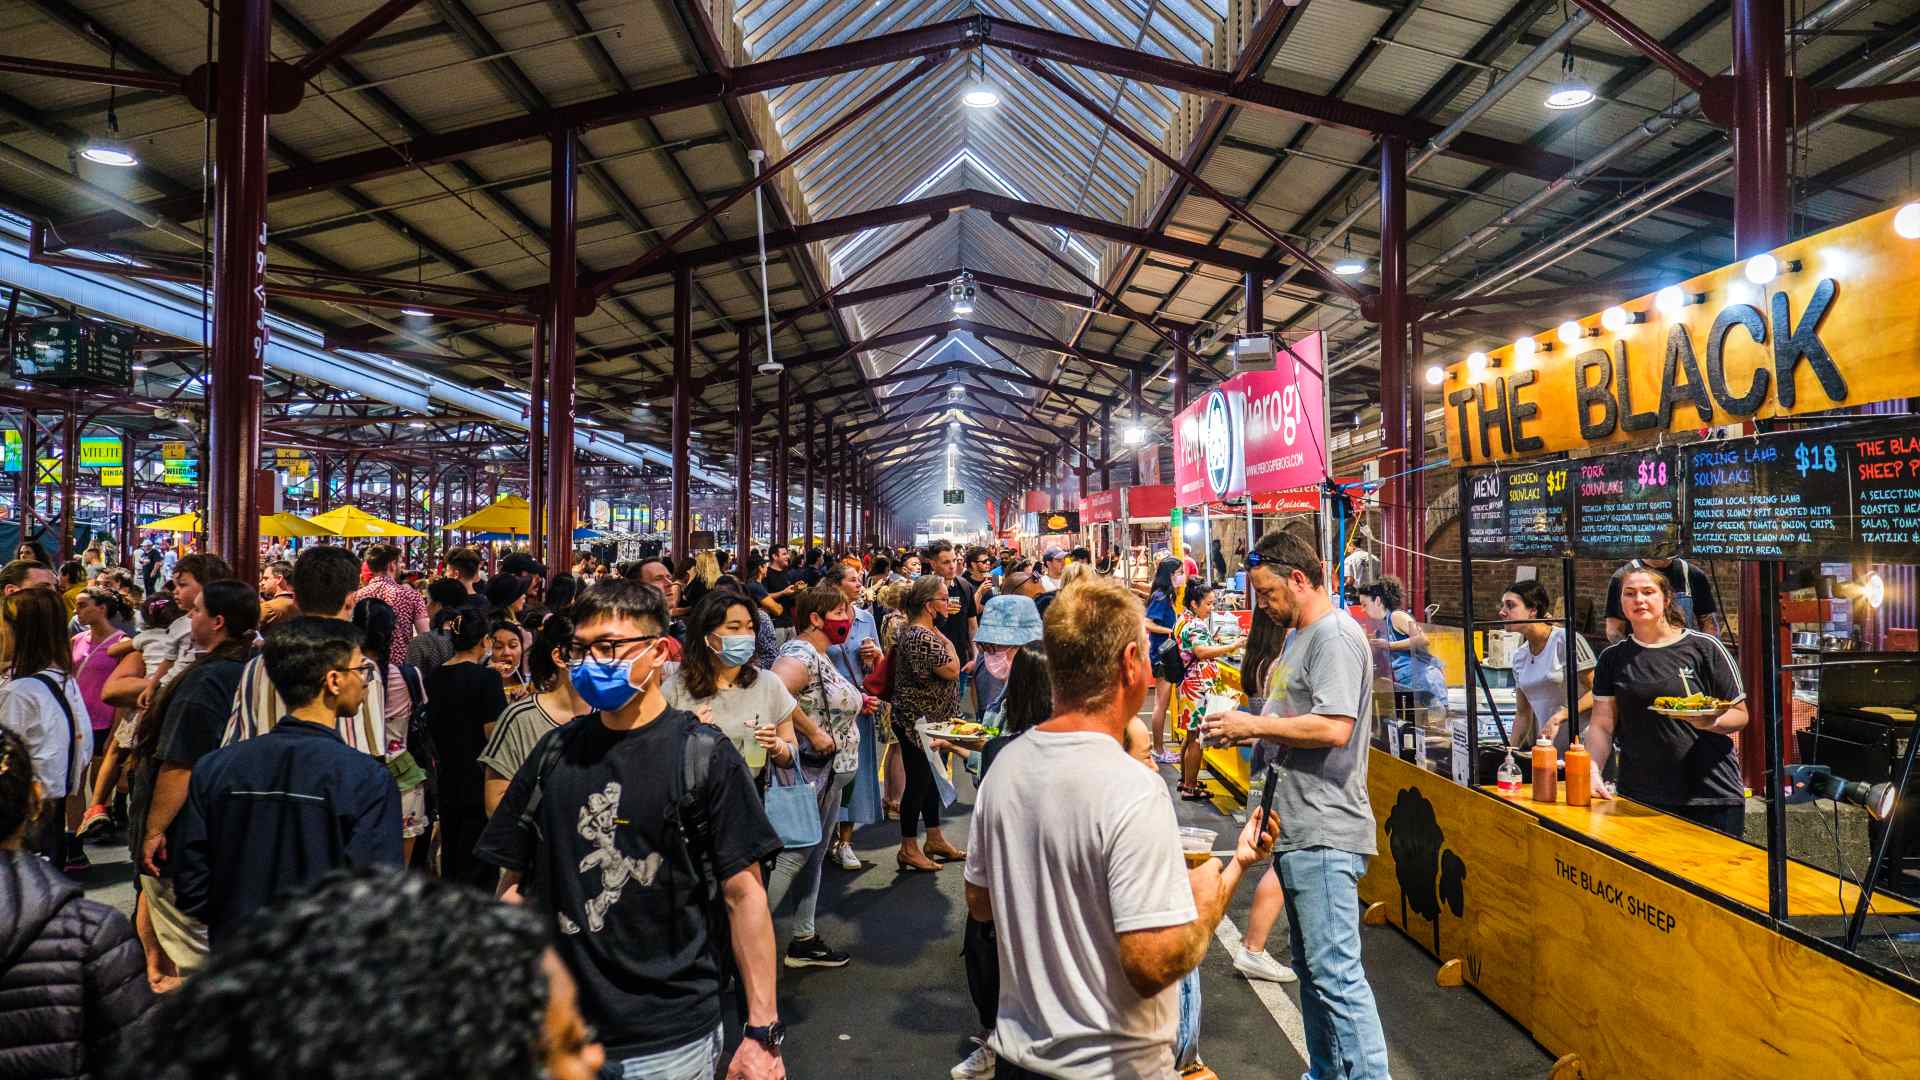 Crowd enjoying the food stalls in the shed at Queen Vic Market